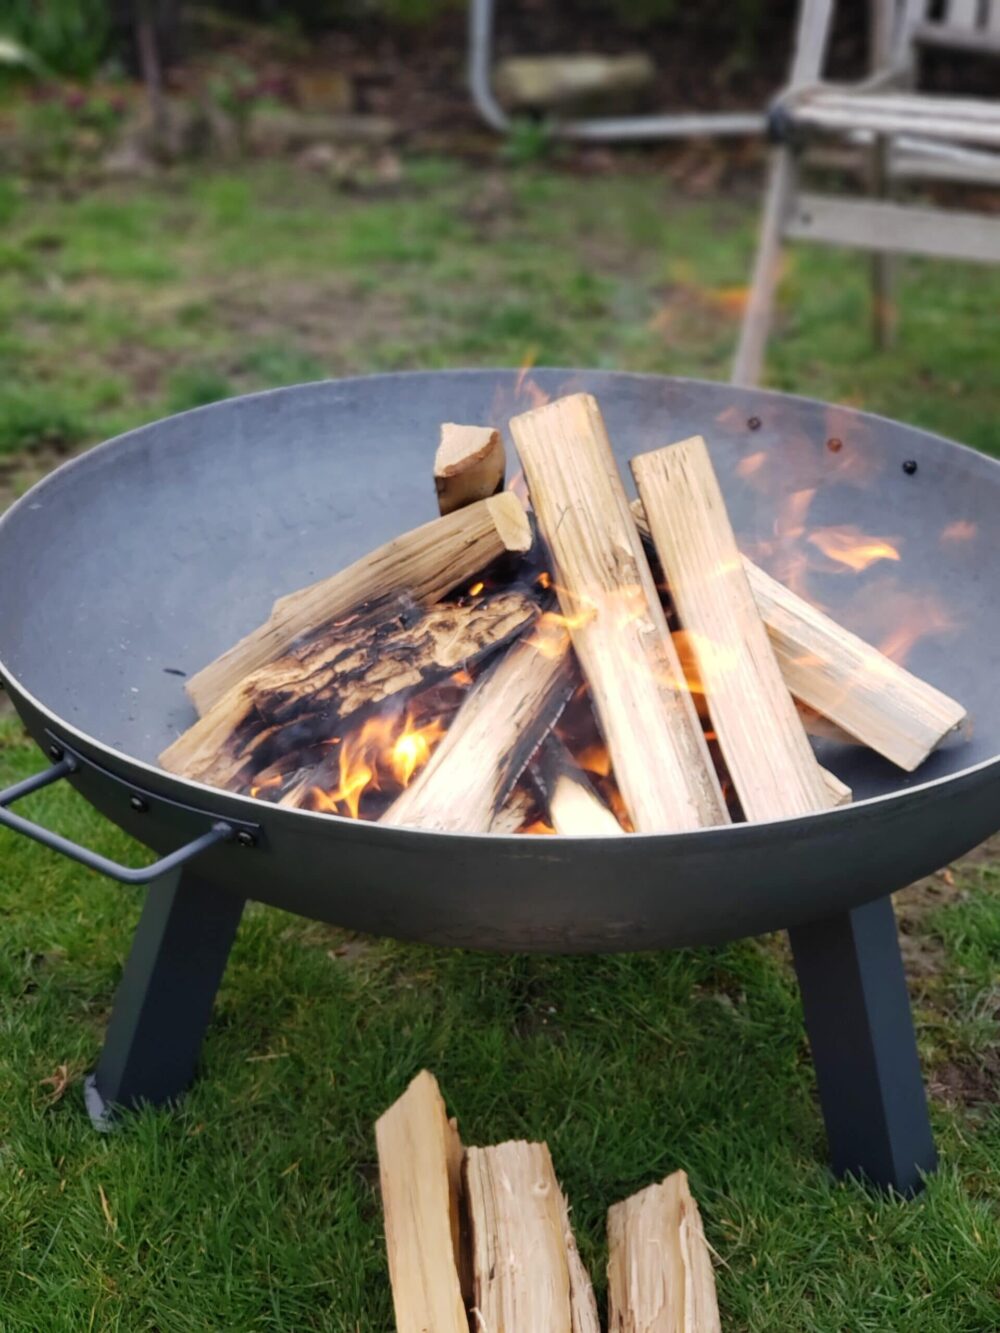 Fire Pit On Grass 5 Best Ways To, Can You Place Fire Pit On Grass